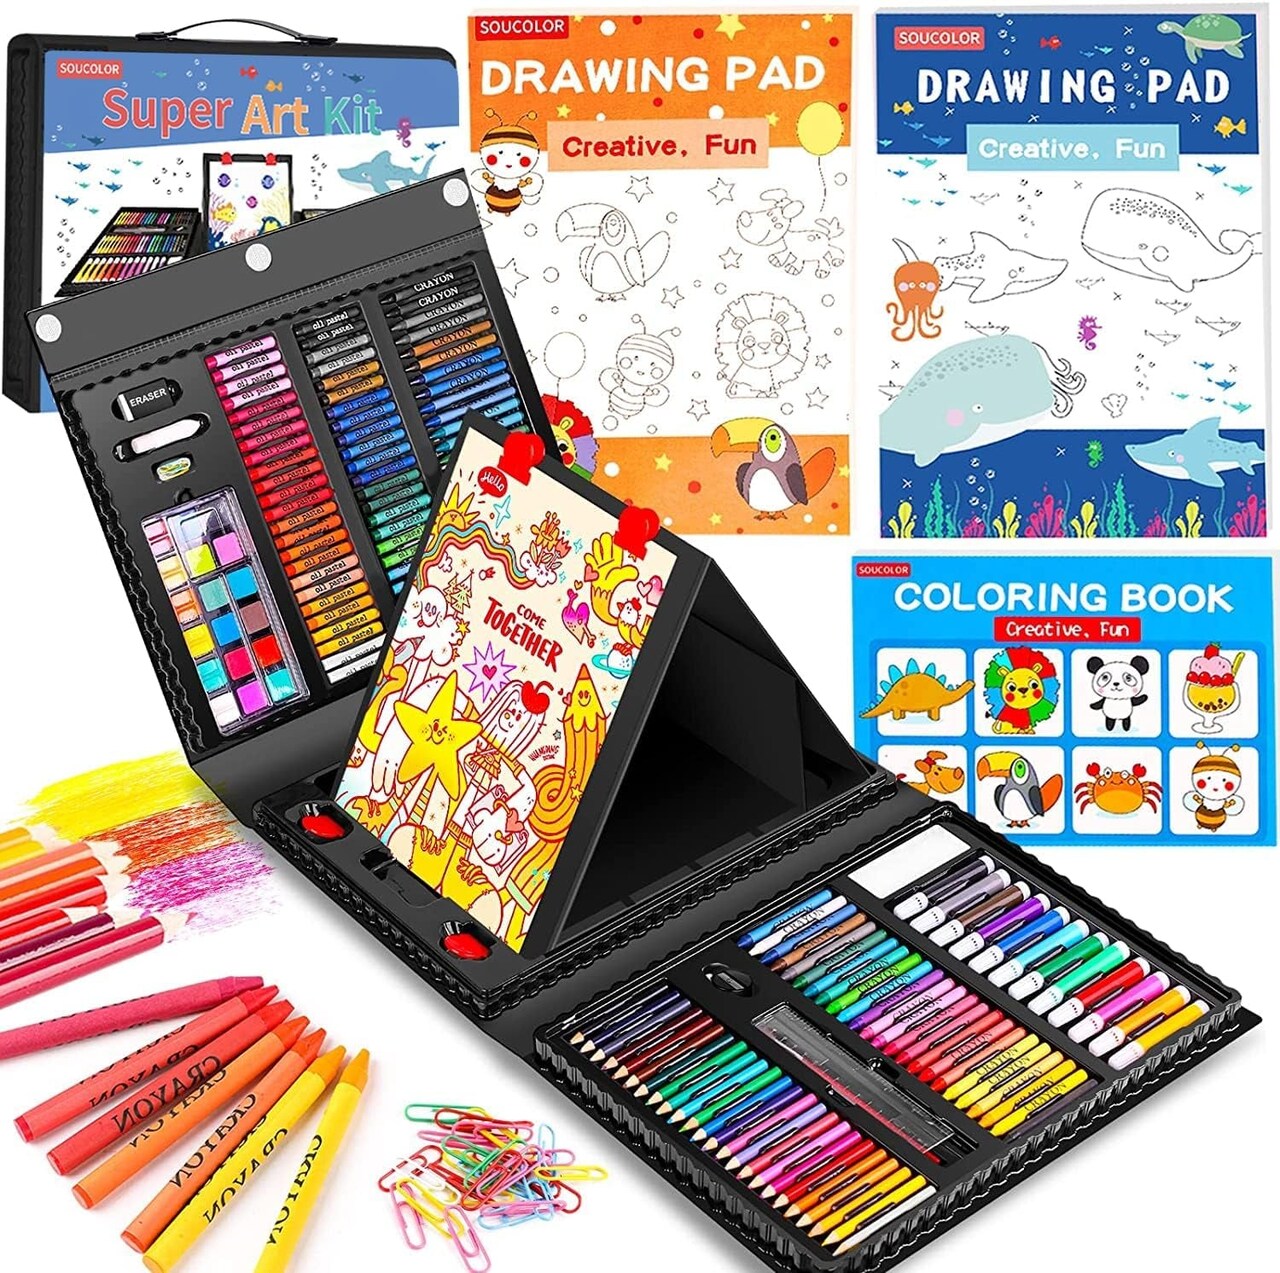 Art Supplies, 283 Pieces Drawing Set Art Kits with Trifold Easel, 2 Drawing  Pads, 1 Coloring Book, Crayons, Pastels, Arts and Crafts Gifts Case for Kids  Girls Boys Teens Beginners